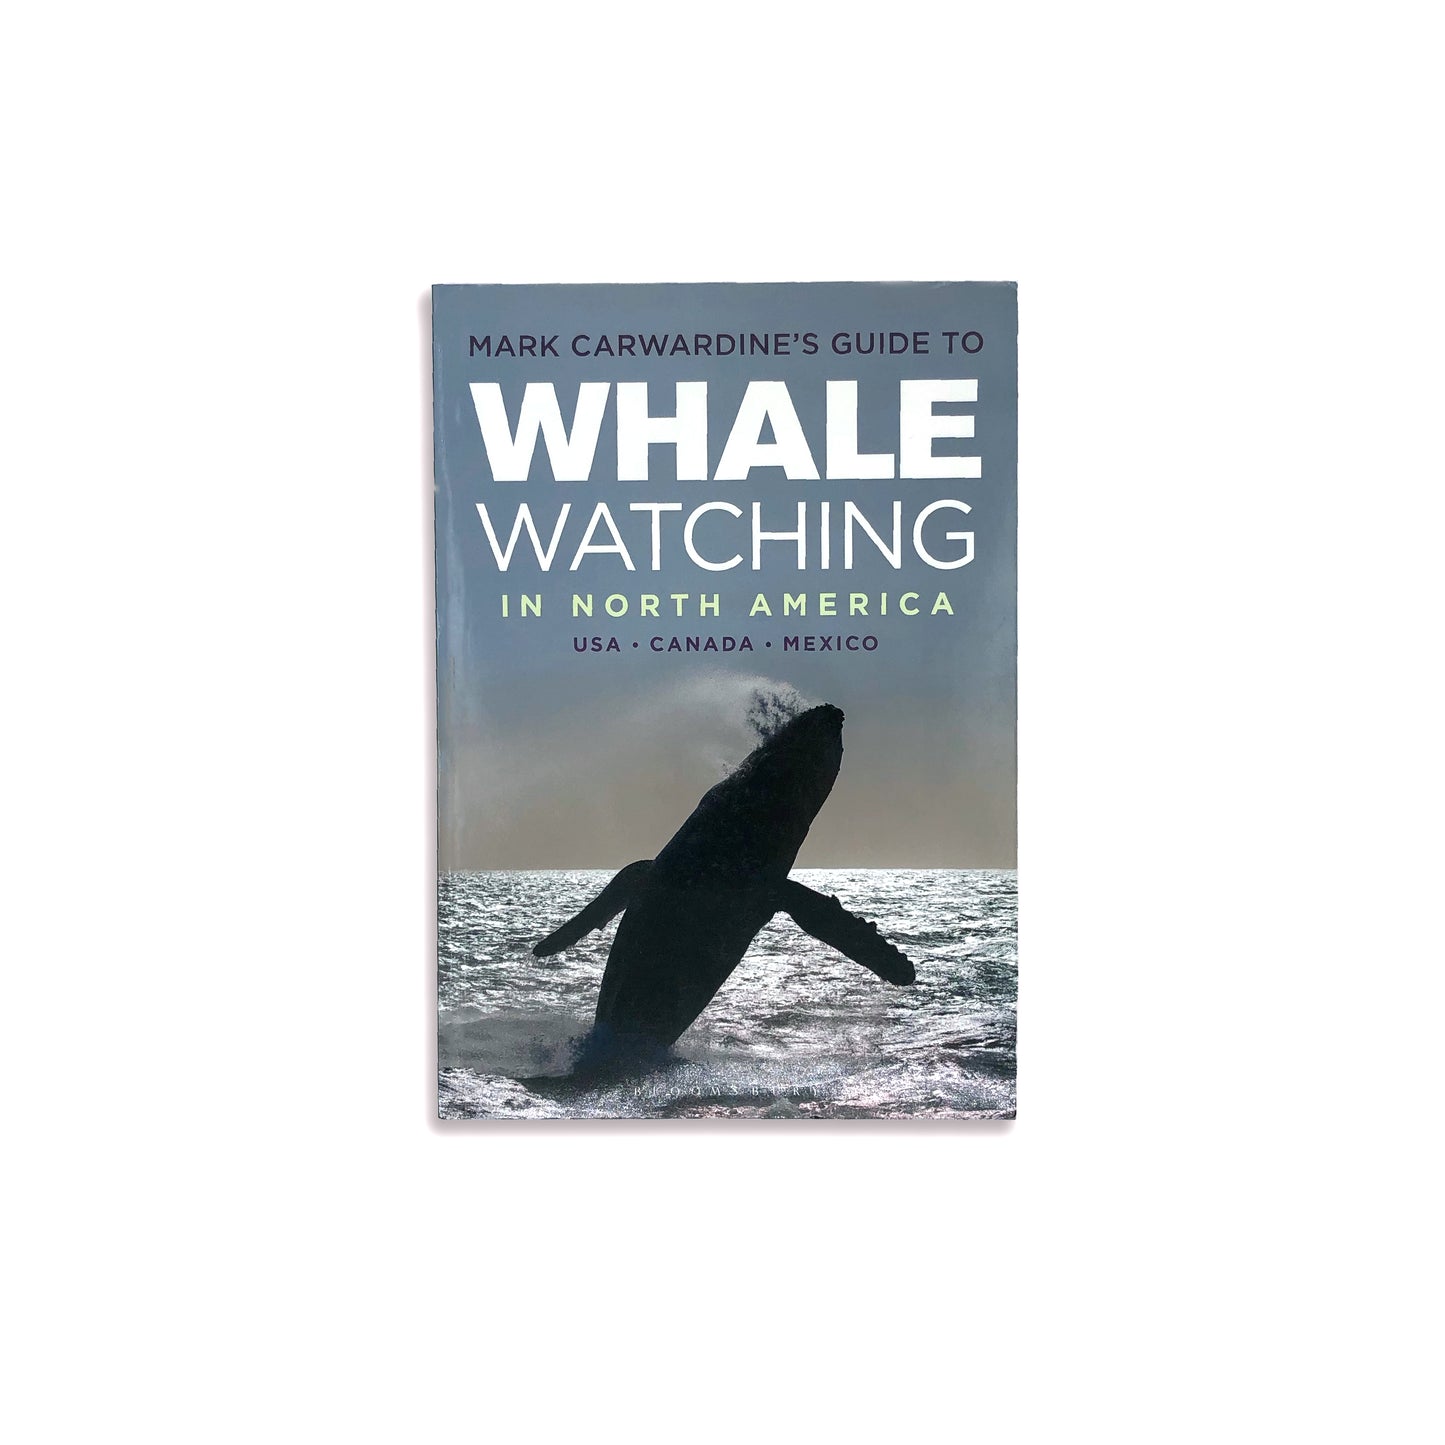 Mark Carwardine's Guide to Whale Watching in North America: USA, Canada, Mexico (paperback)